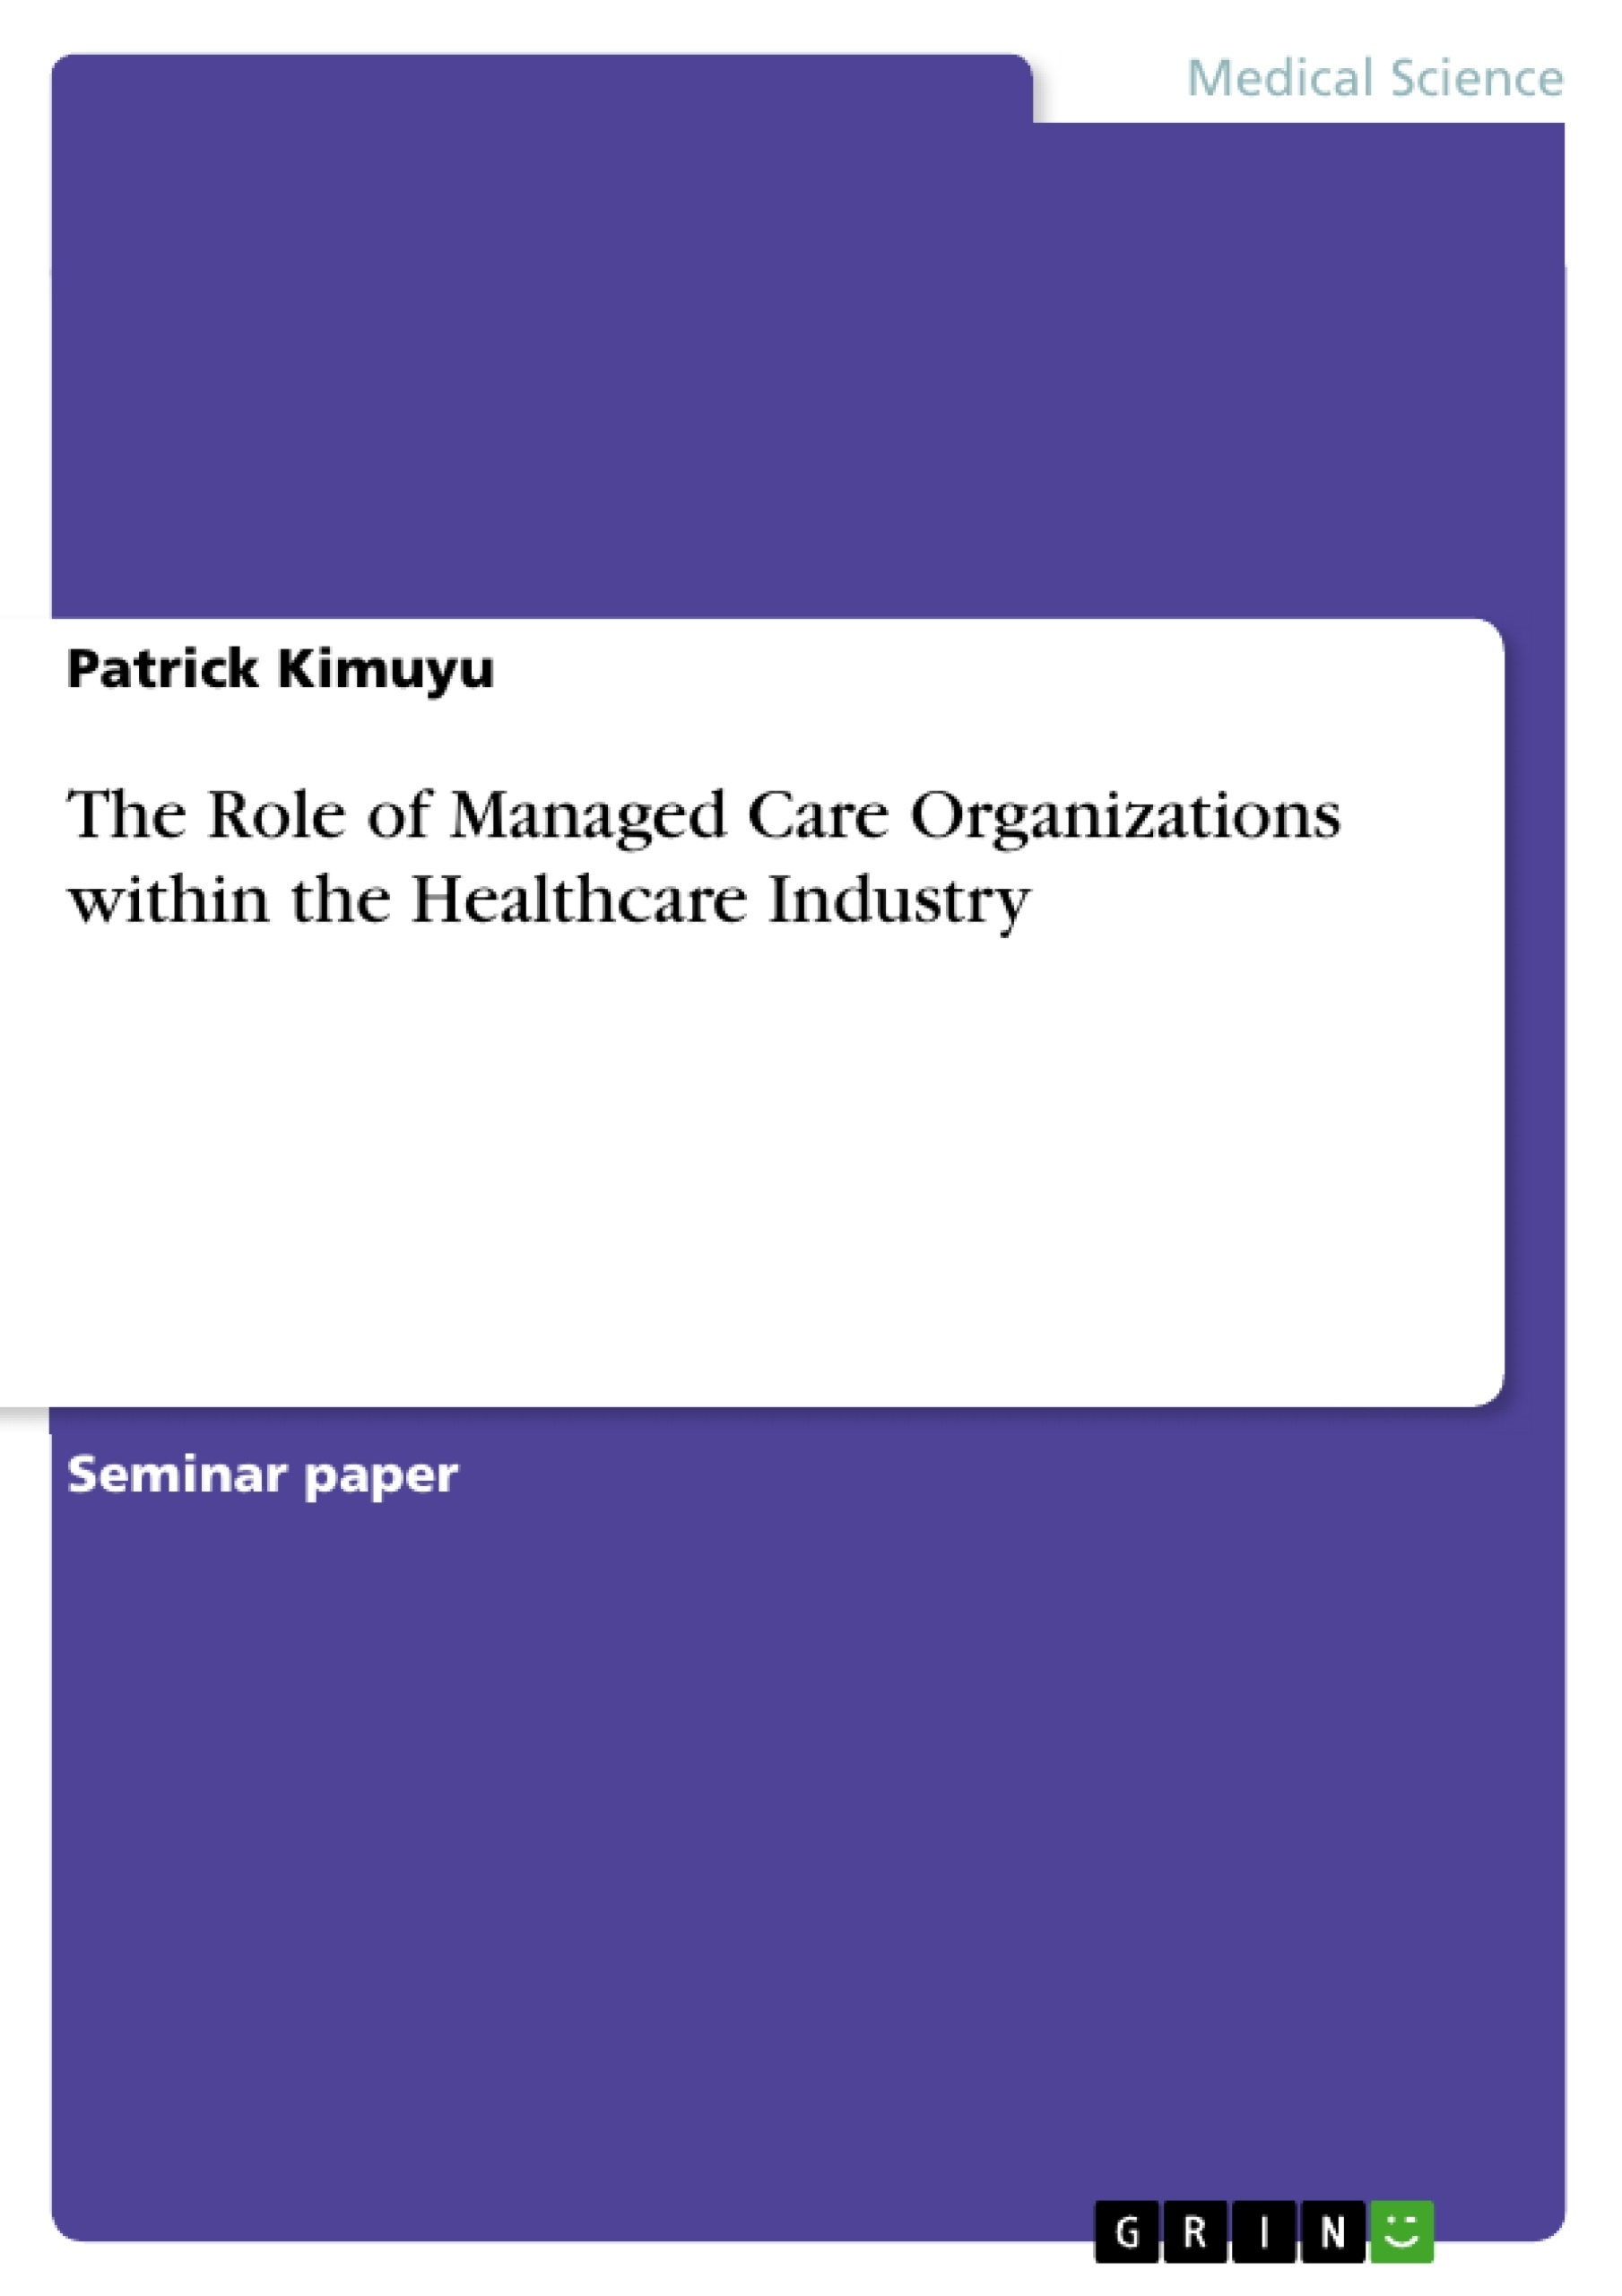 Title: The Role of Managed Care Organizations within the Healthcare Industry